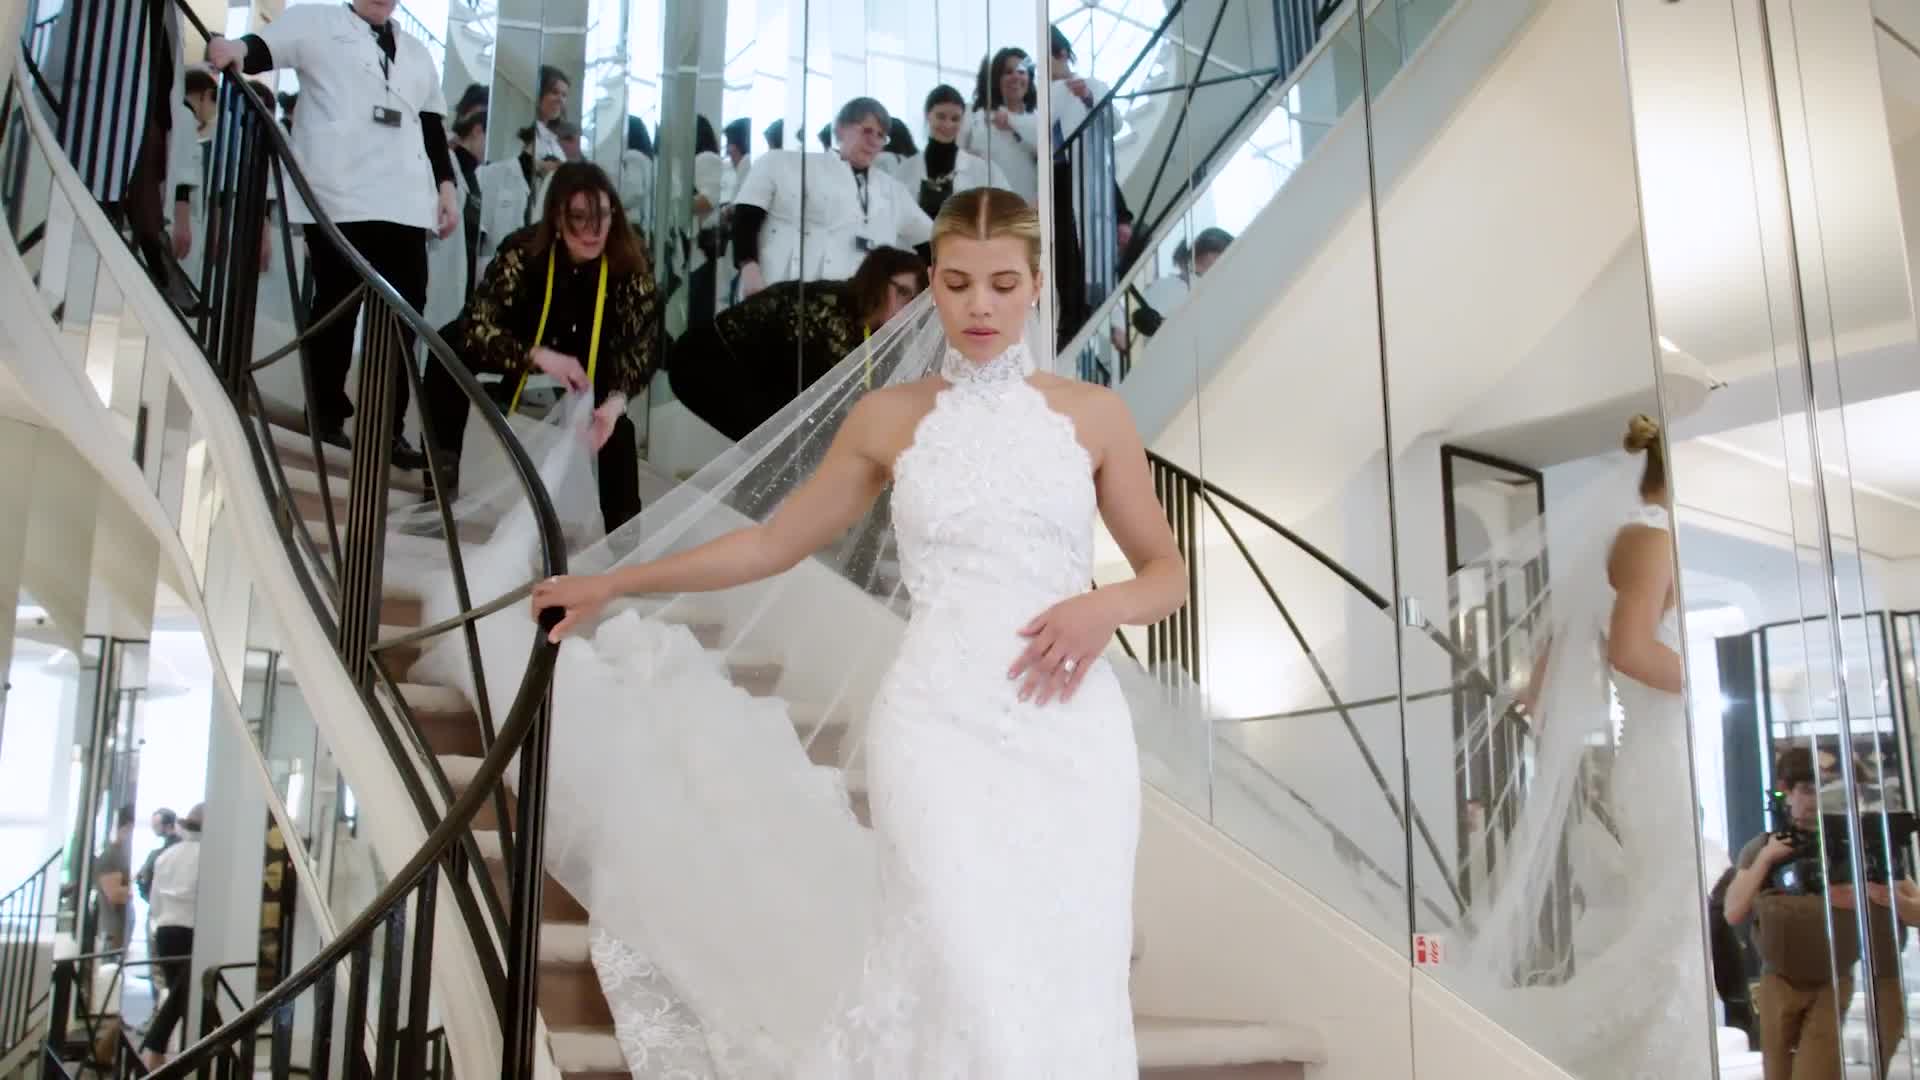 Watch Inside Sofia Richie’s Final Wedding Dress Fitting at Chanel | The ...